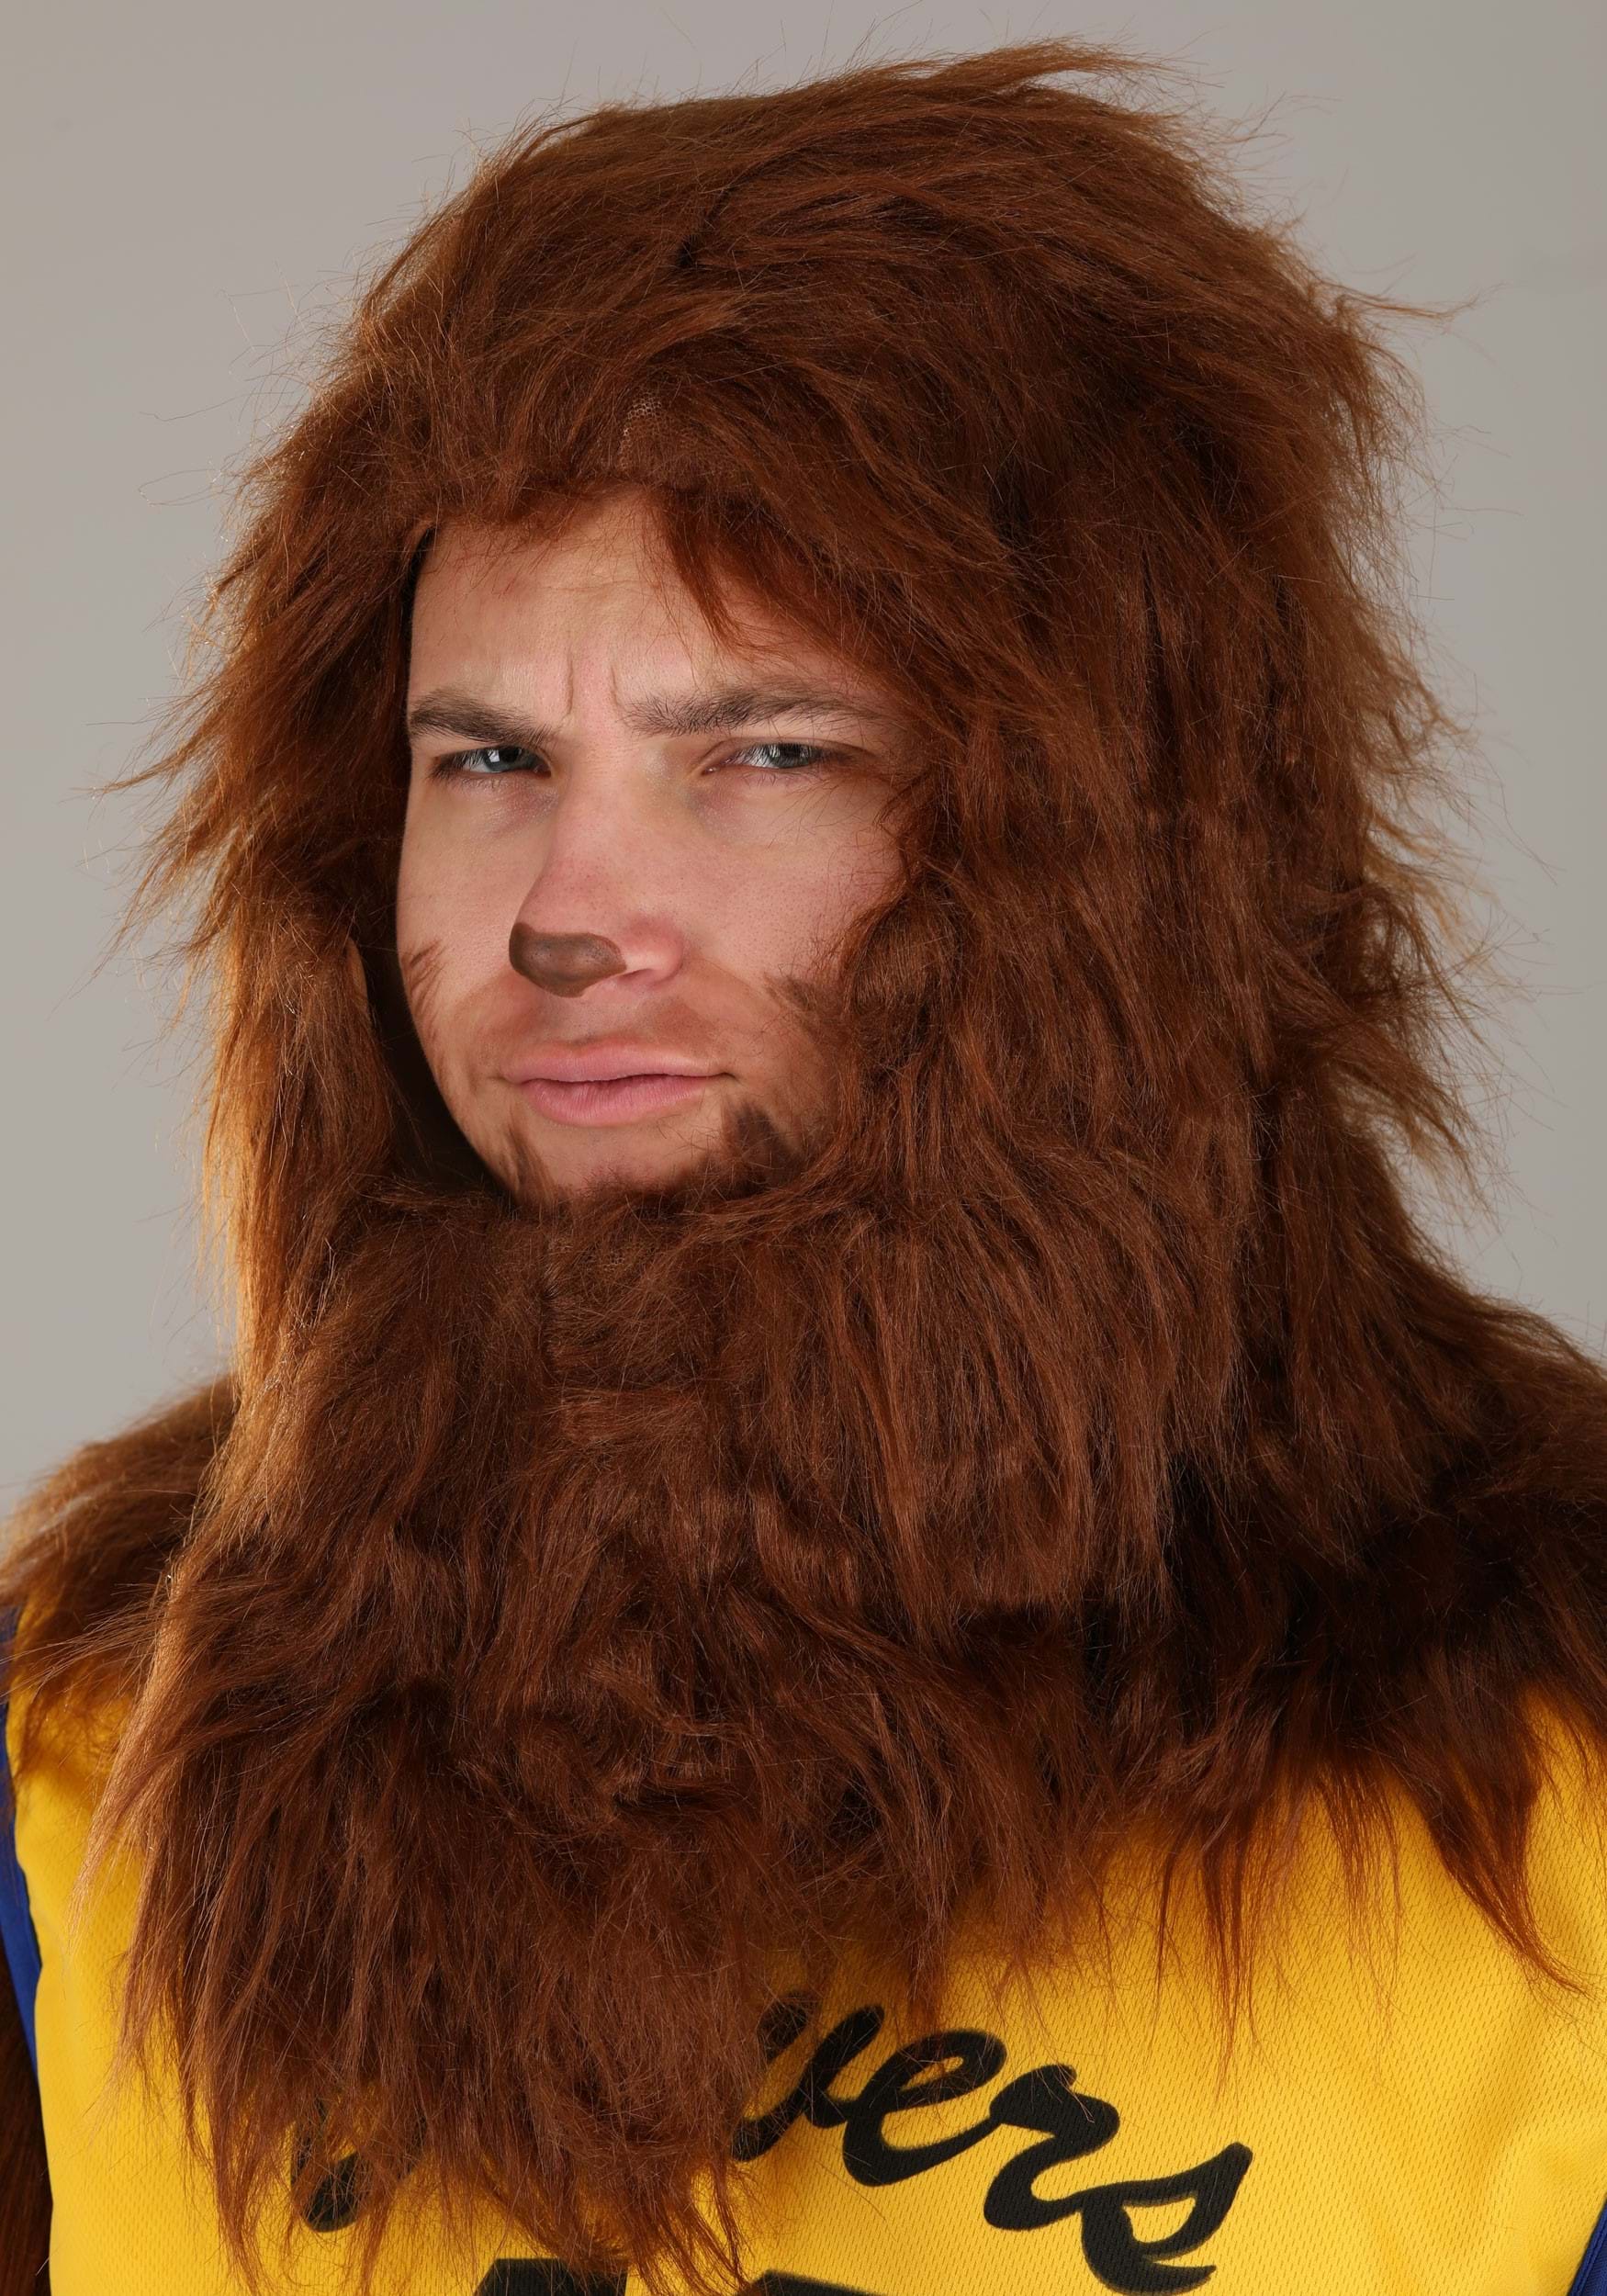 Teen Wolf Costume For Adults